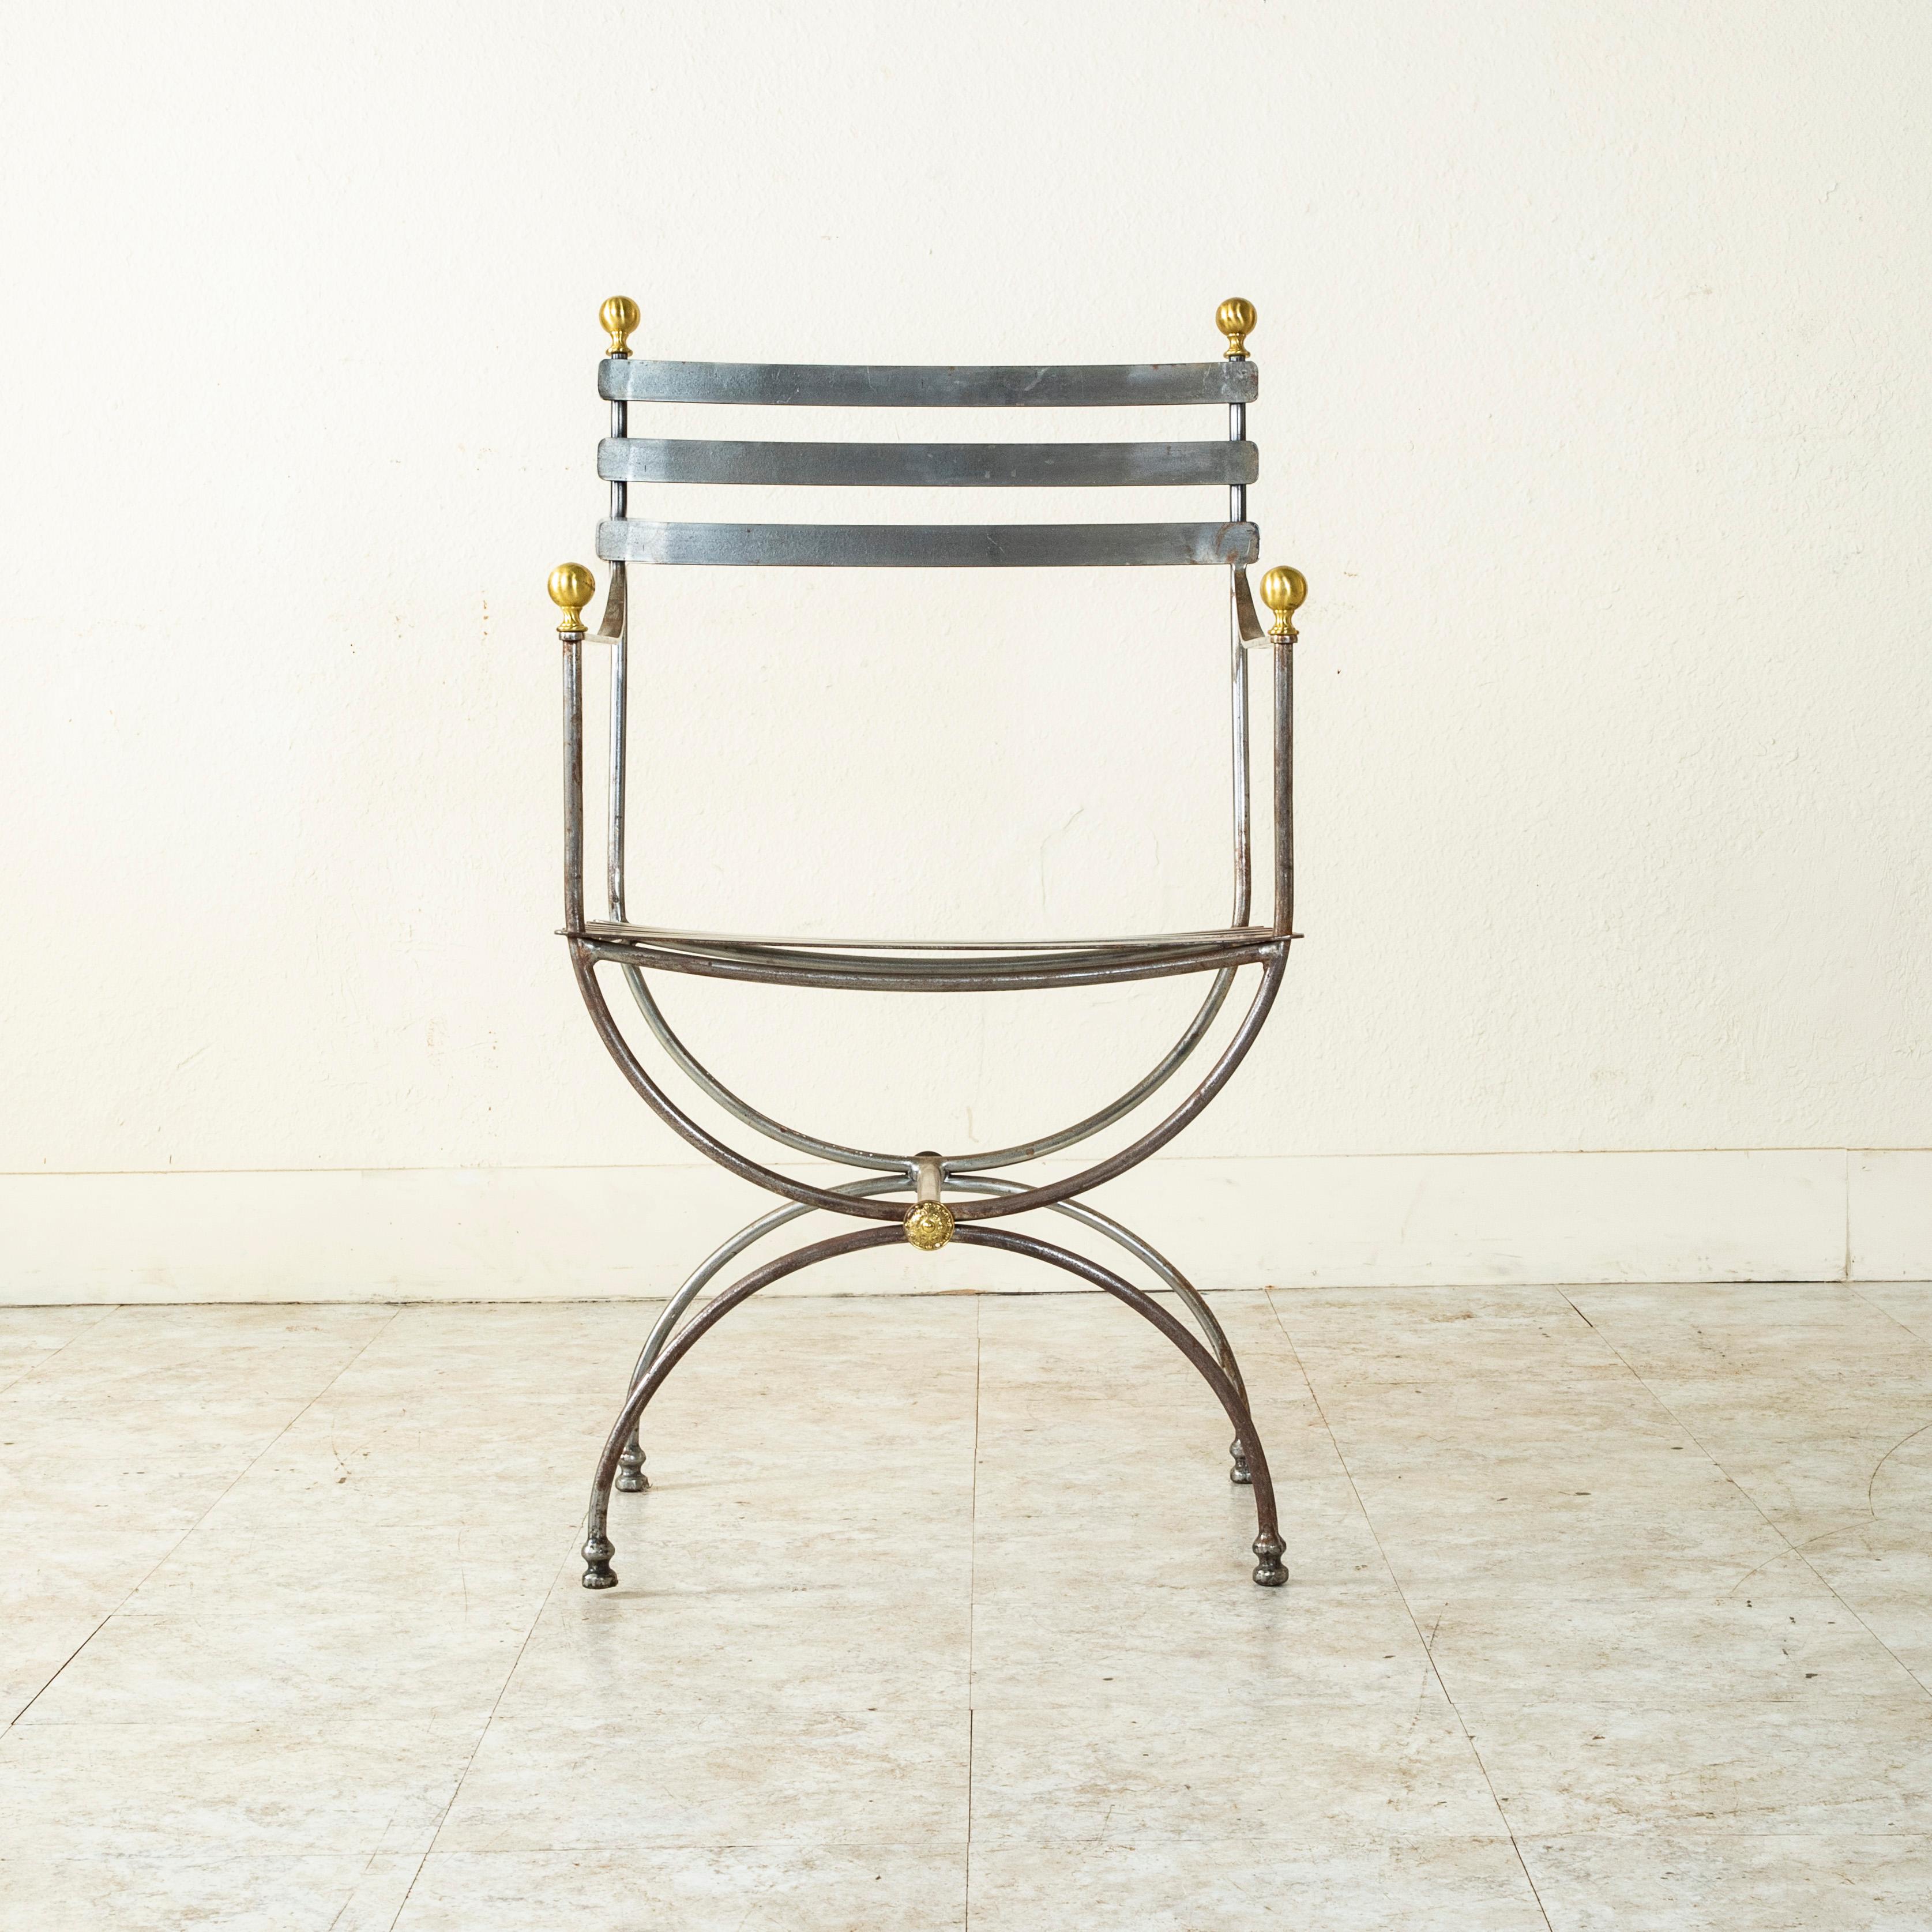 This Mid-20th Century French steel armchair features steel slats that form the seat and seat back. The seat rests on legs made of two opposing half circles joined by a stretcher. A brass rosette details each end of the stretcher, and the armrests